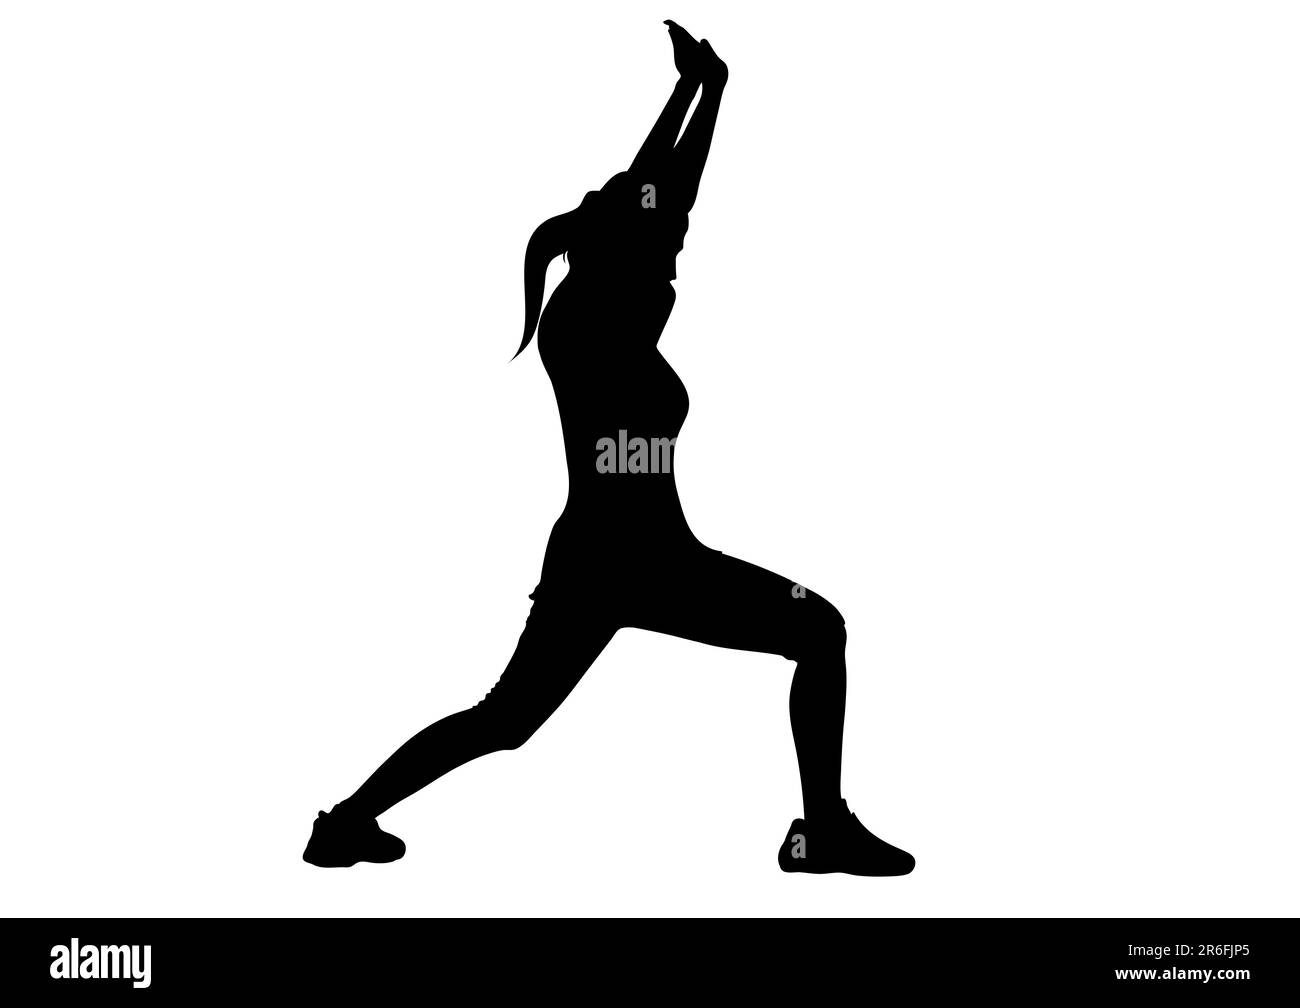 graphics image drawing tai chi concept exercise for health vector illustration Stock Photo